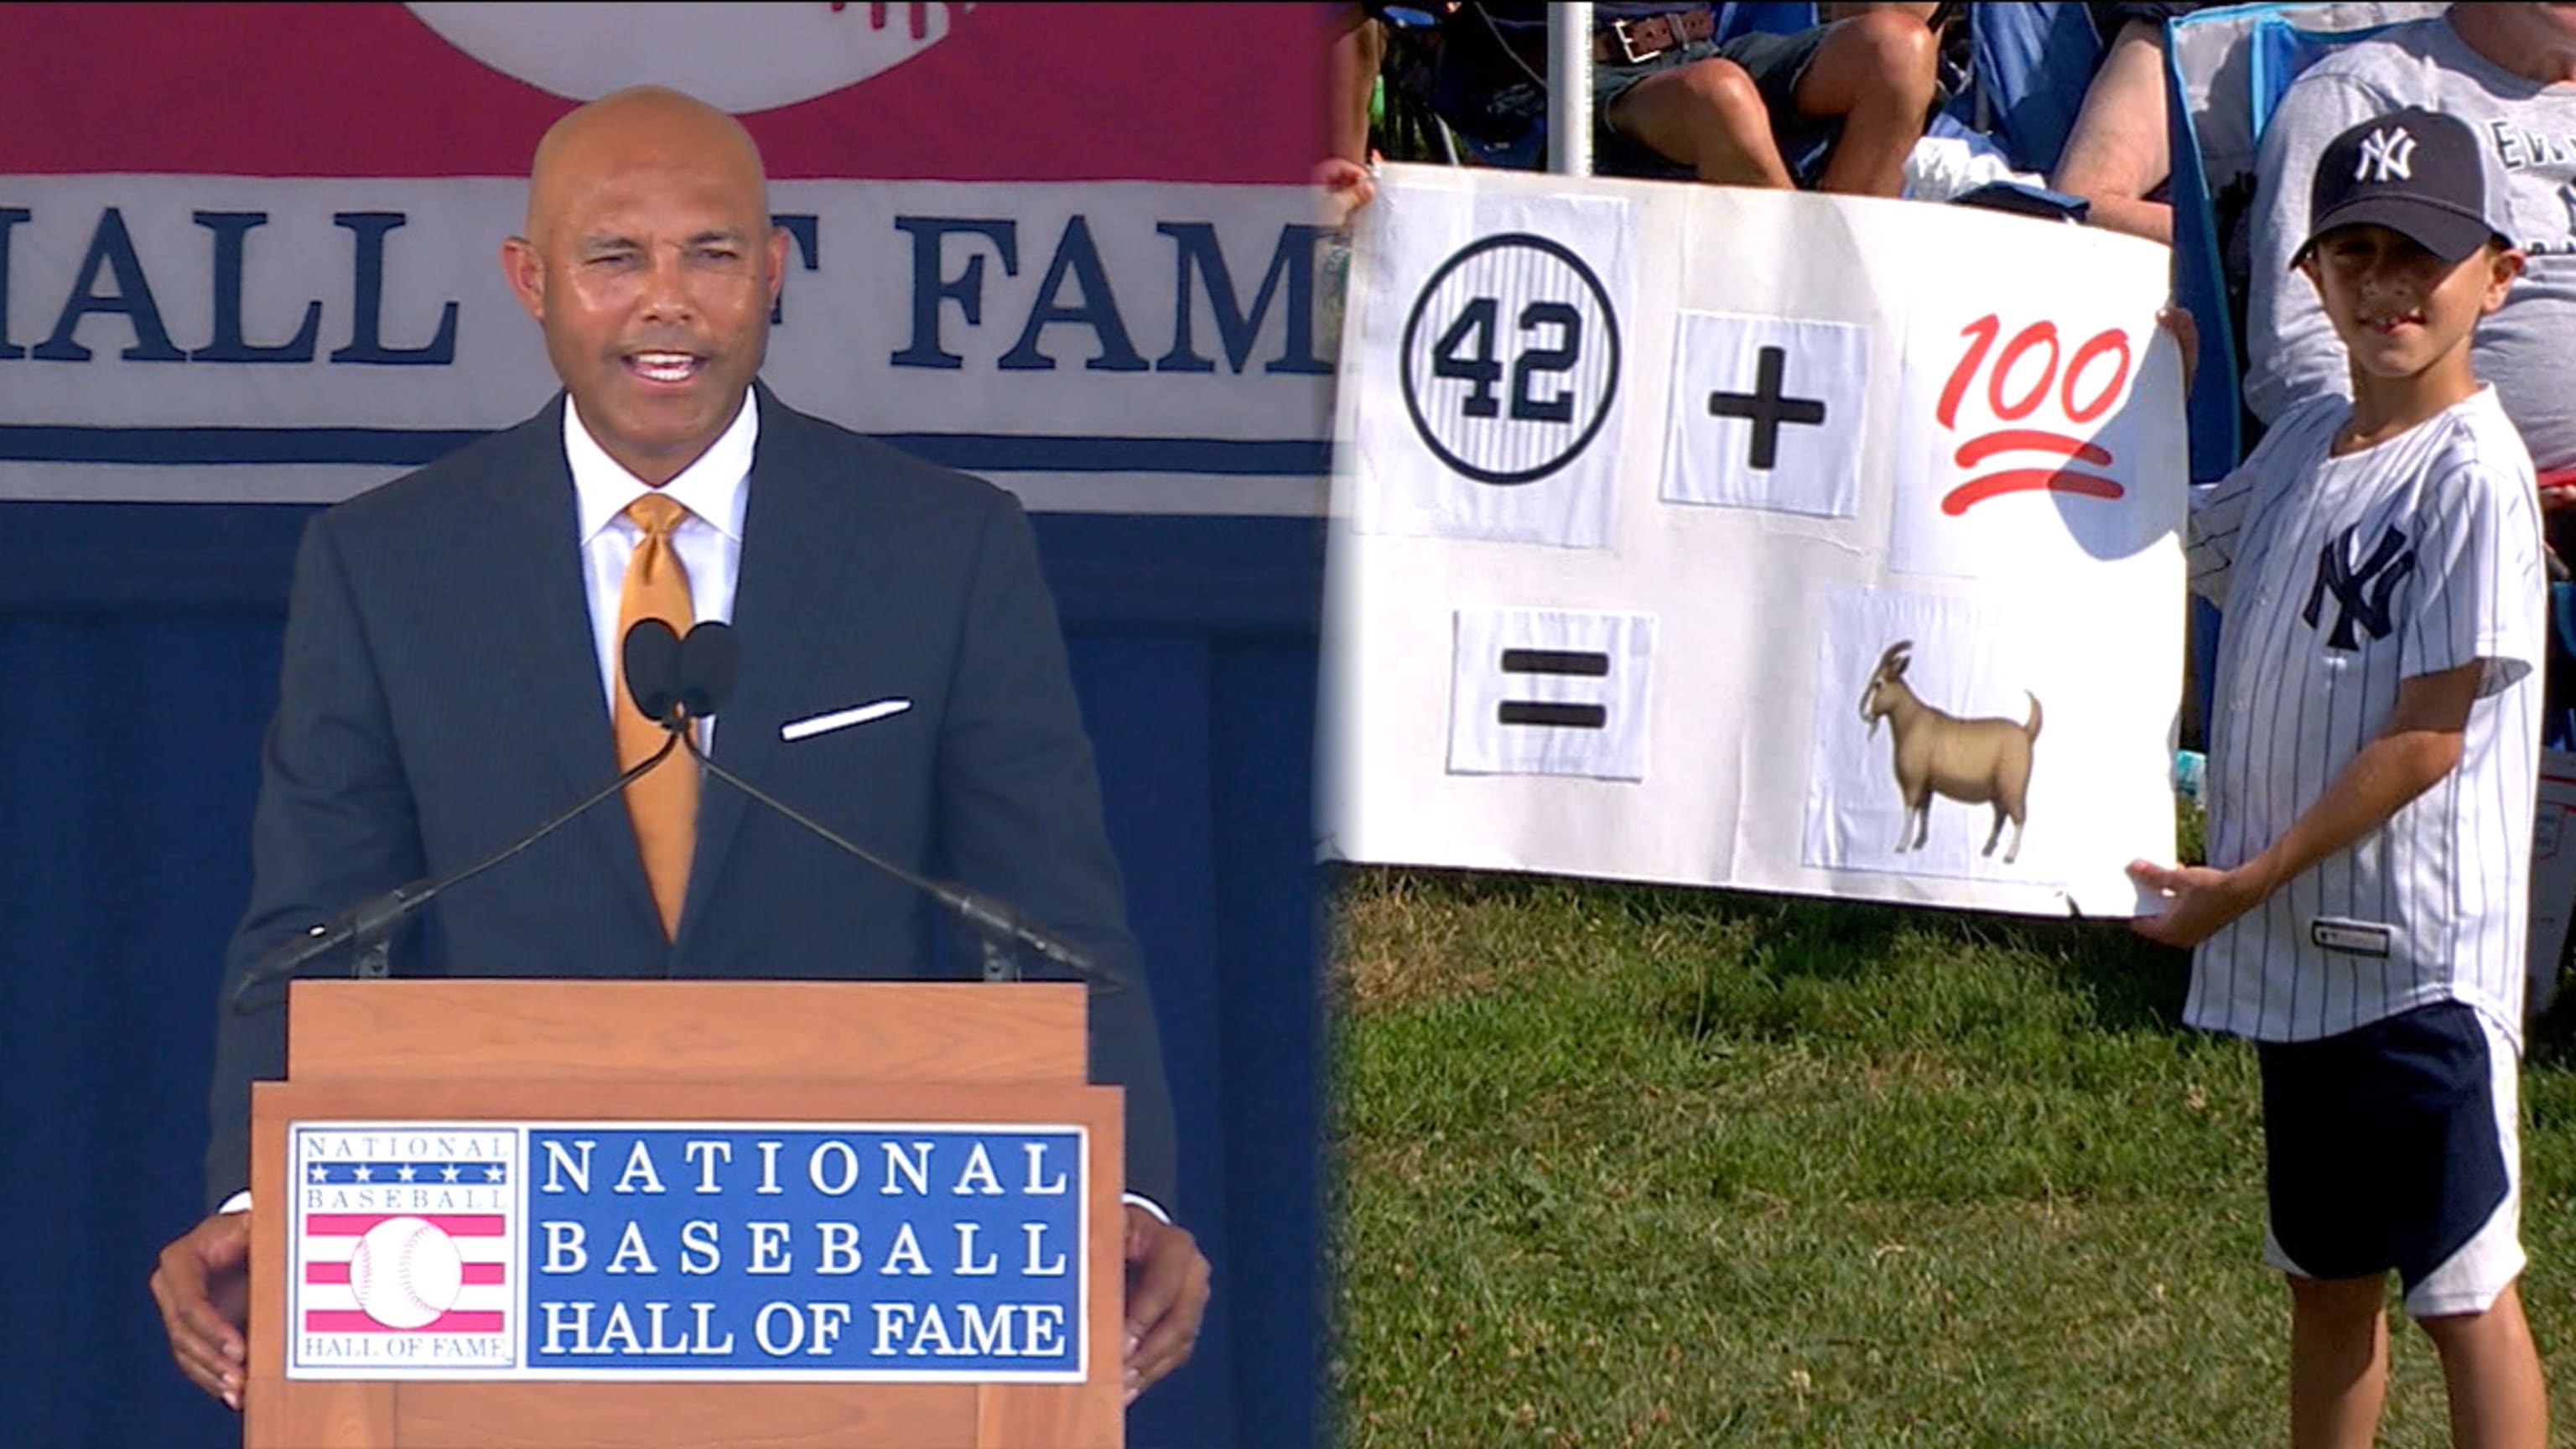 Sheehan: Mariano Rivera Was A Hall Of Famer In More Ways Than One